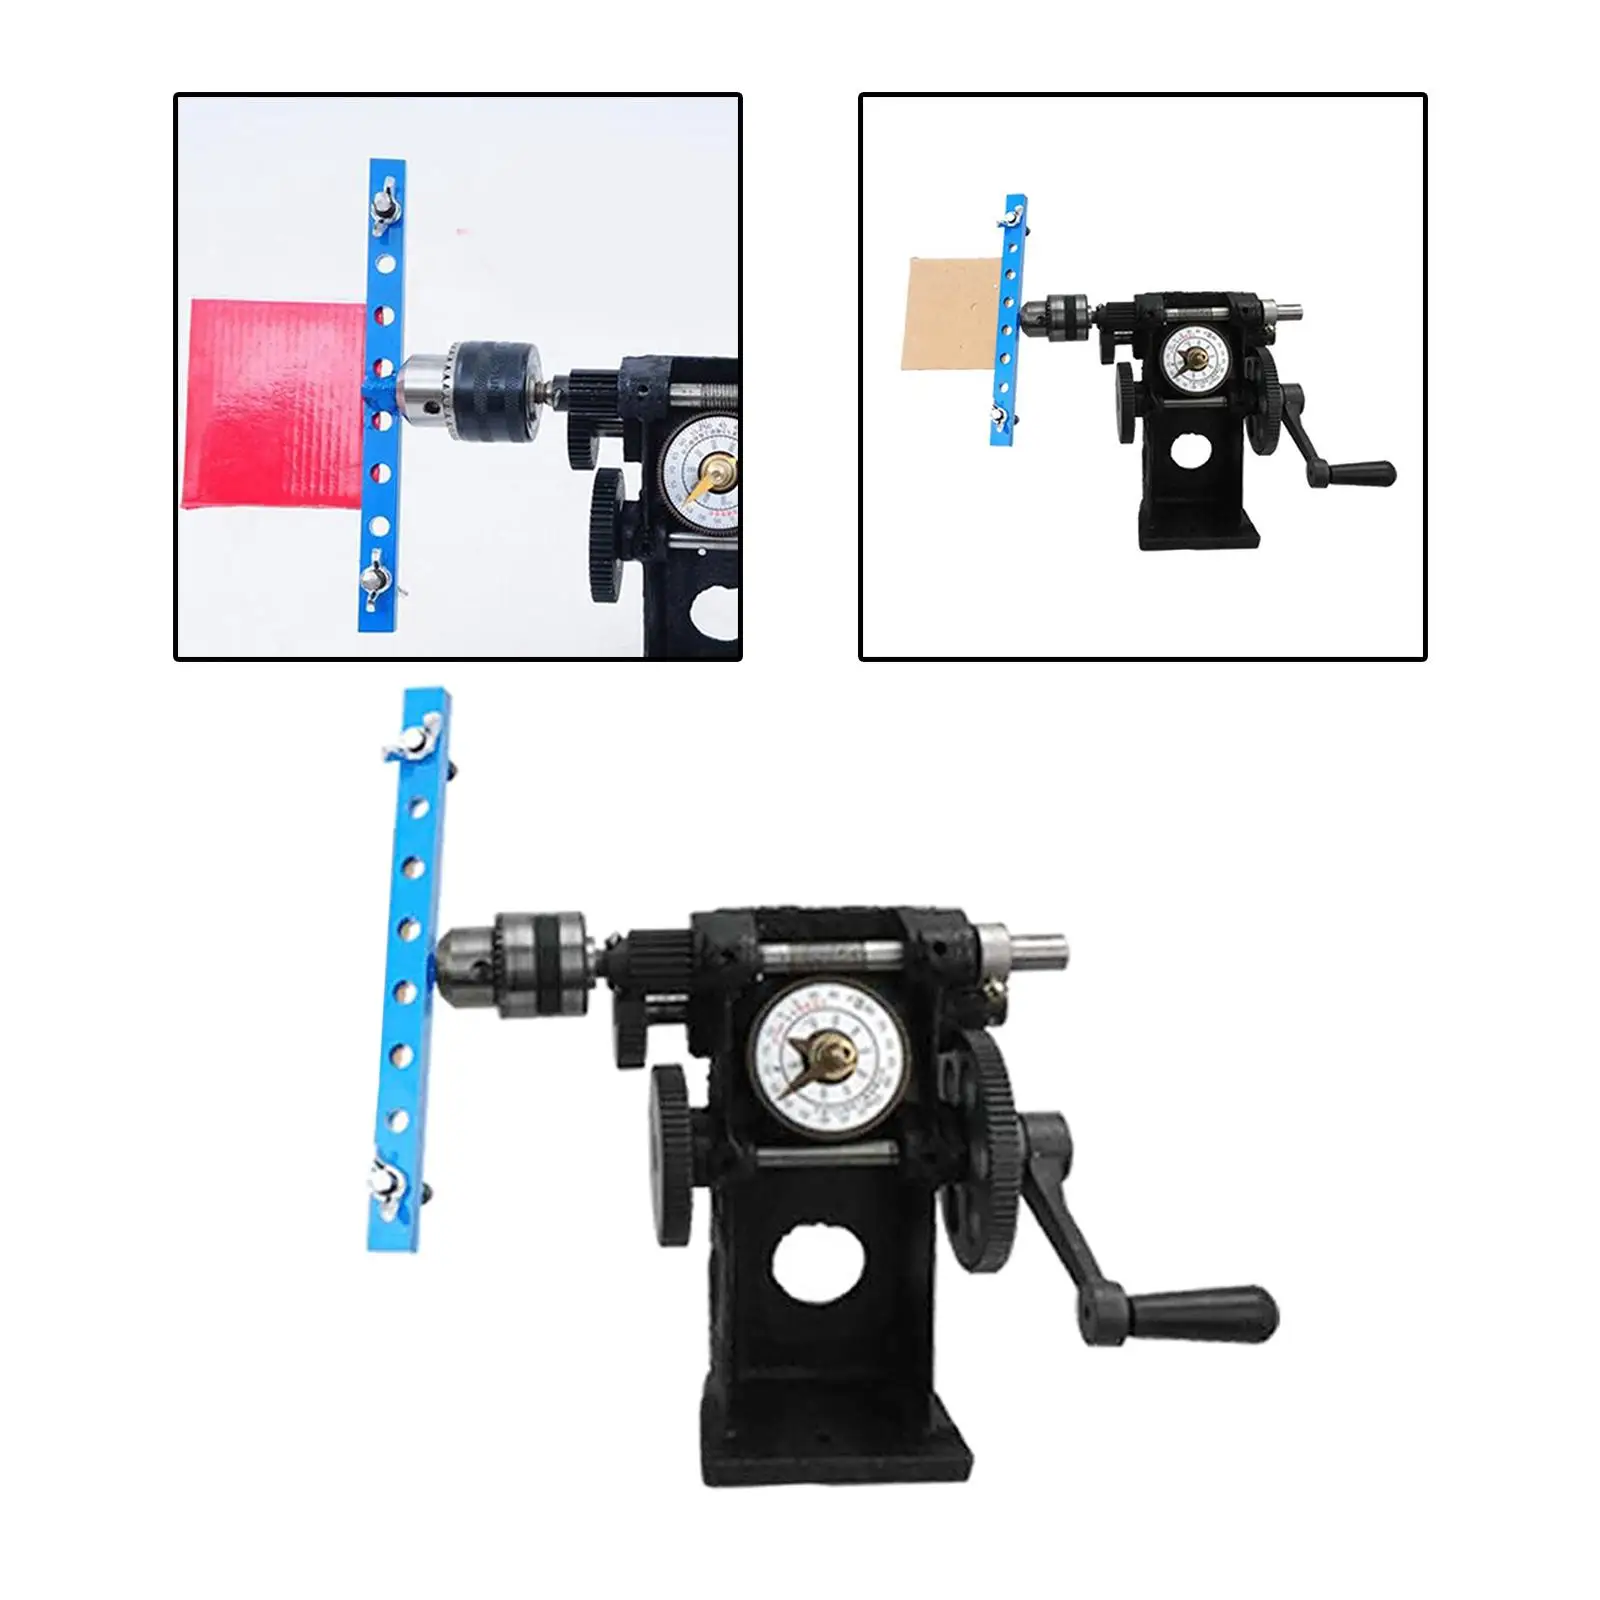 Manual Paper Winding Machine Manually Winding Machine 5mm~200mm Clamping Width Easy to Use Convenient for Sewing DIY Cards